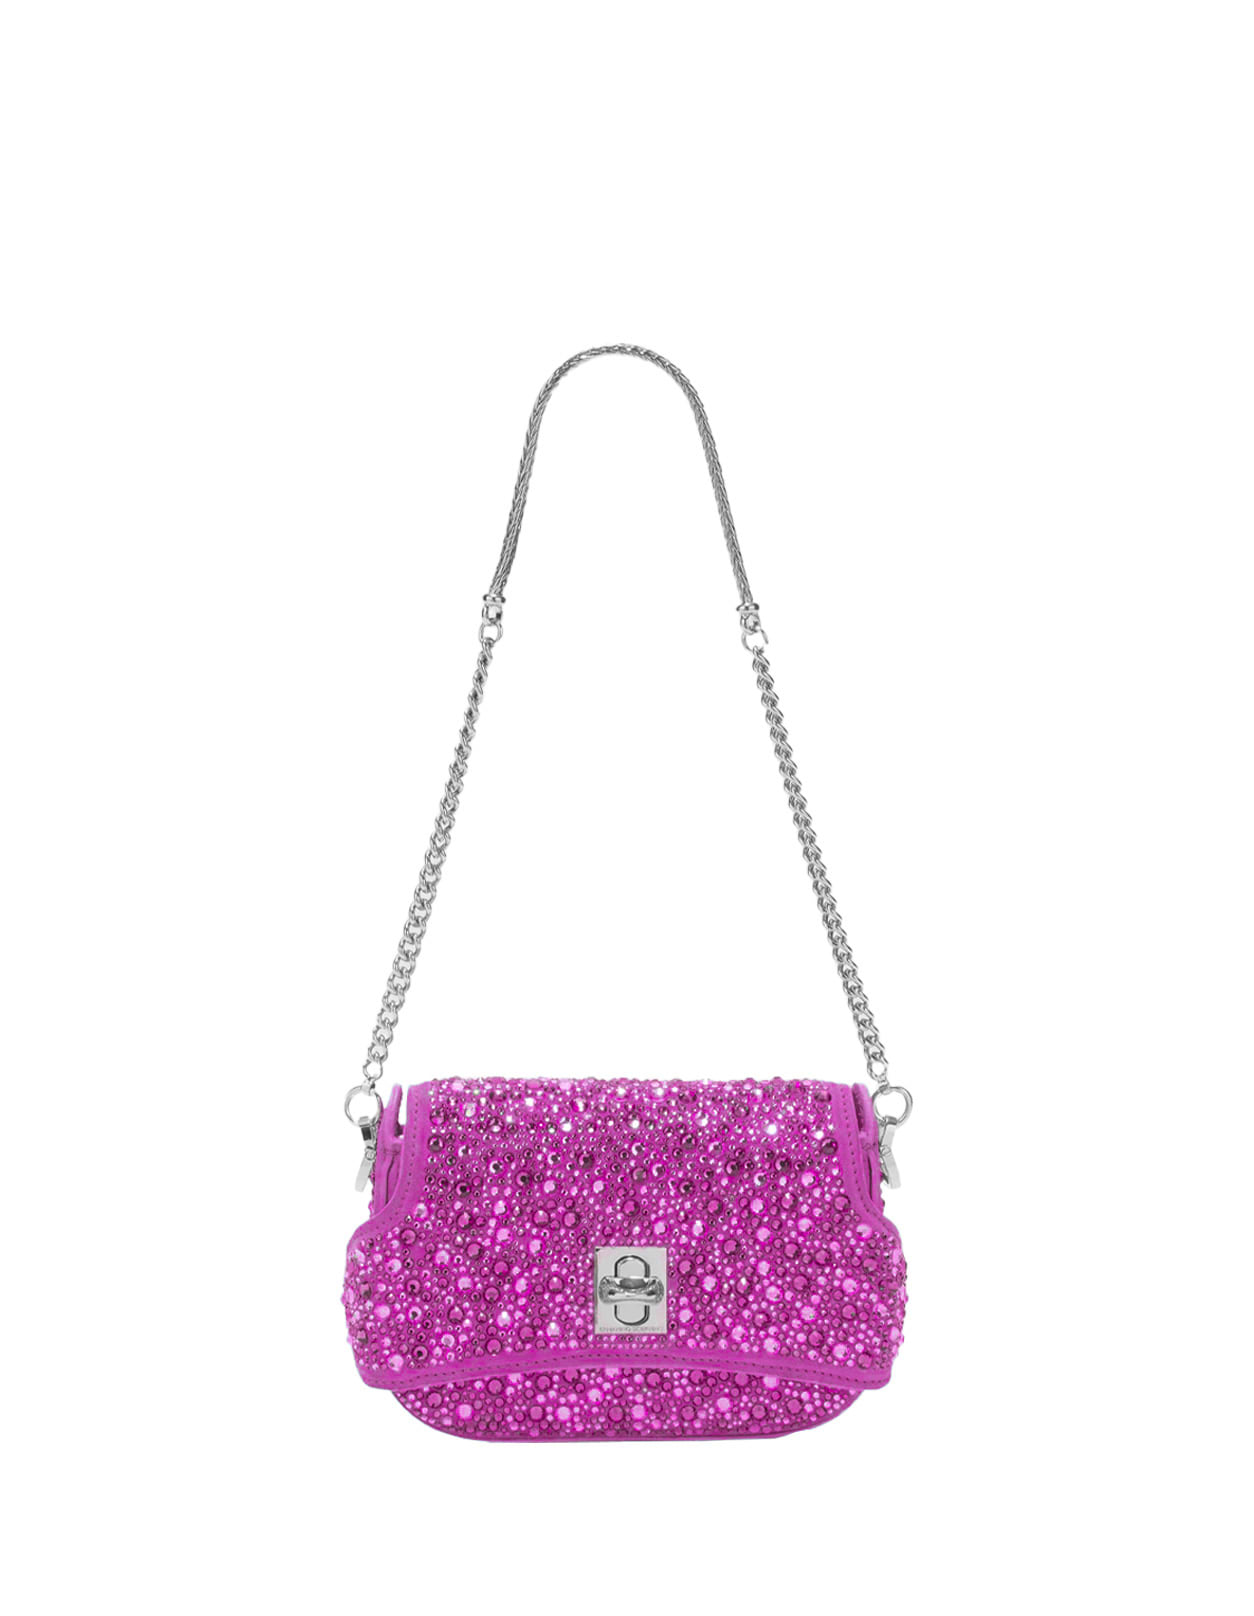 Fuchsia Audrey Bag With Crystals